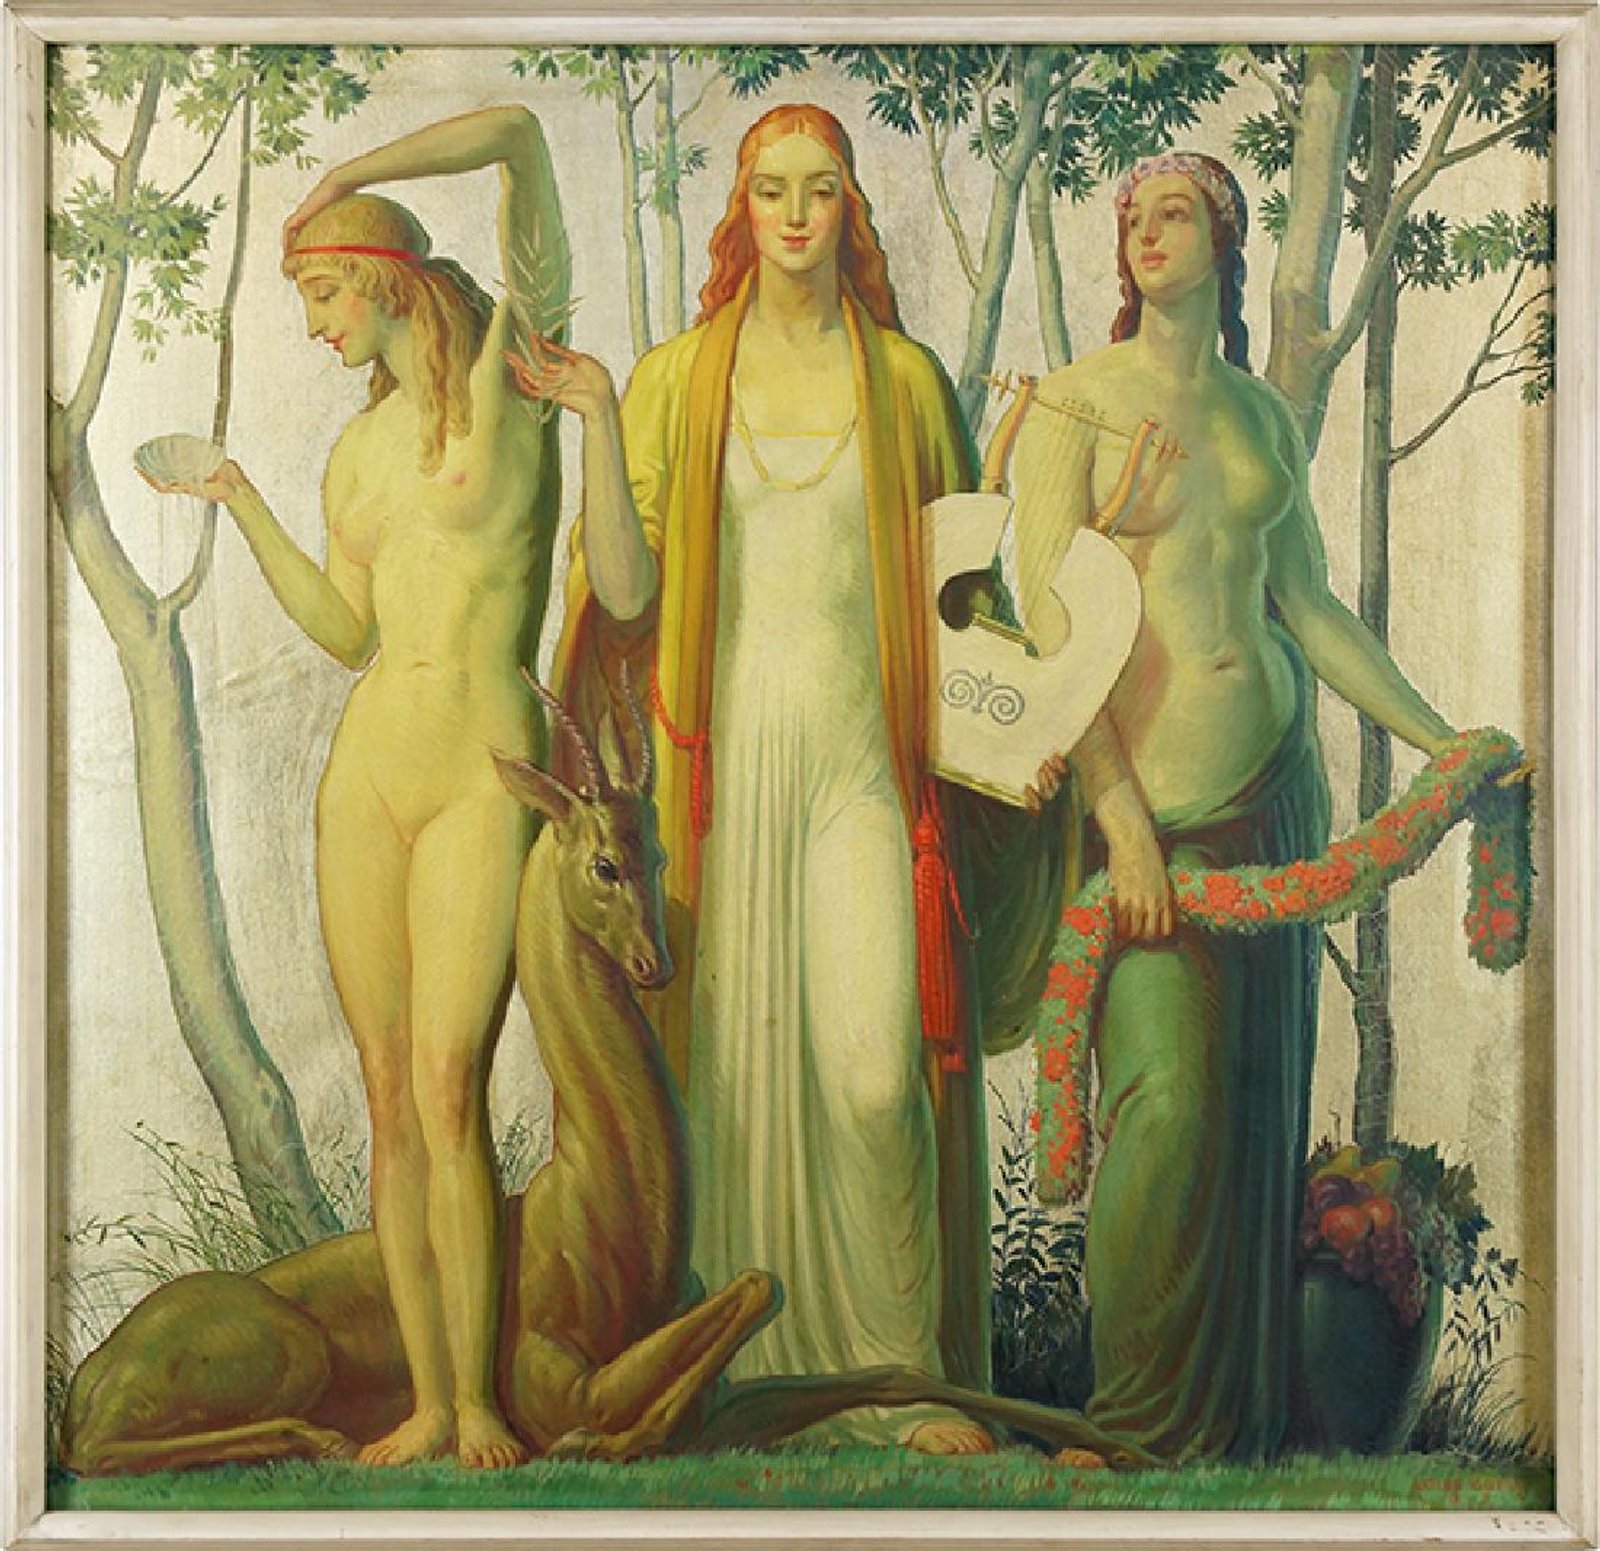 Three Muses for sale May 23 at Susanin’s